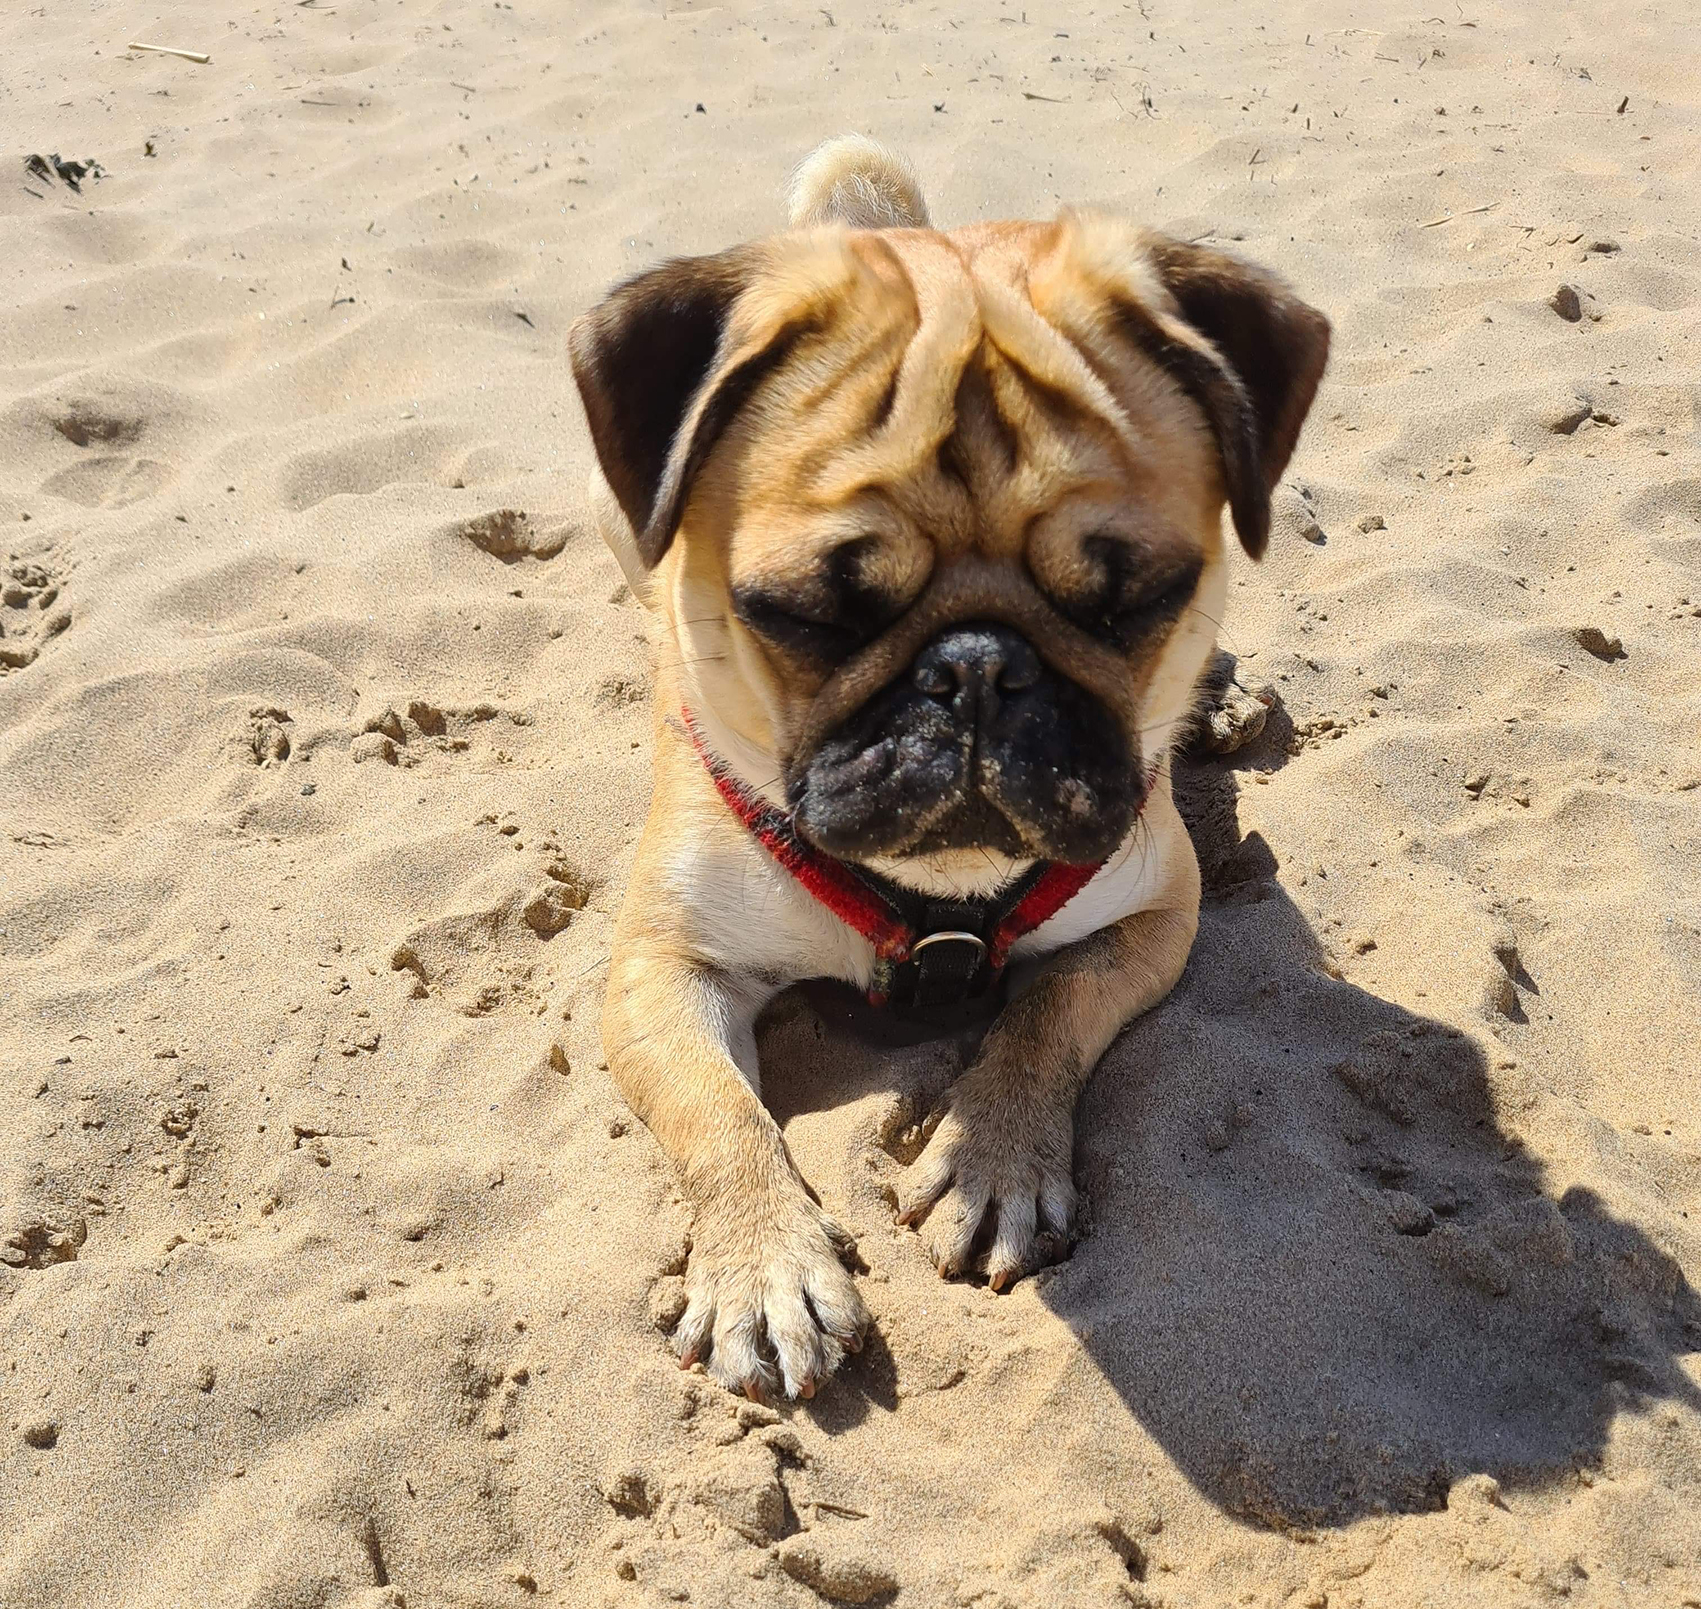 Wheels for Maisy - image Beau on https://pugprotectiontrust.org